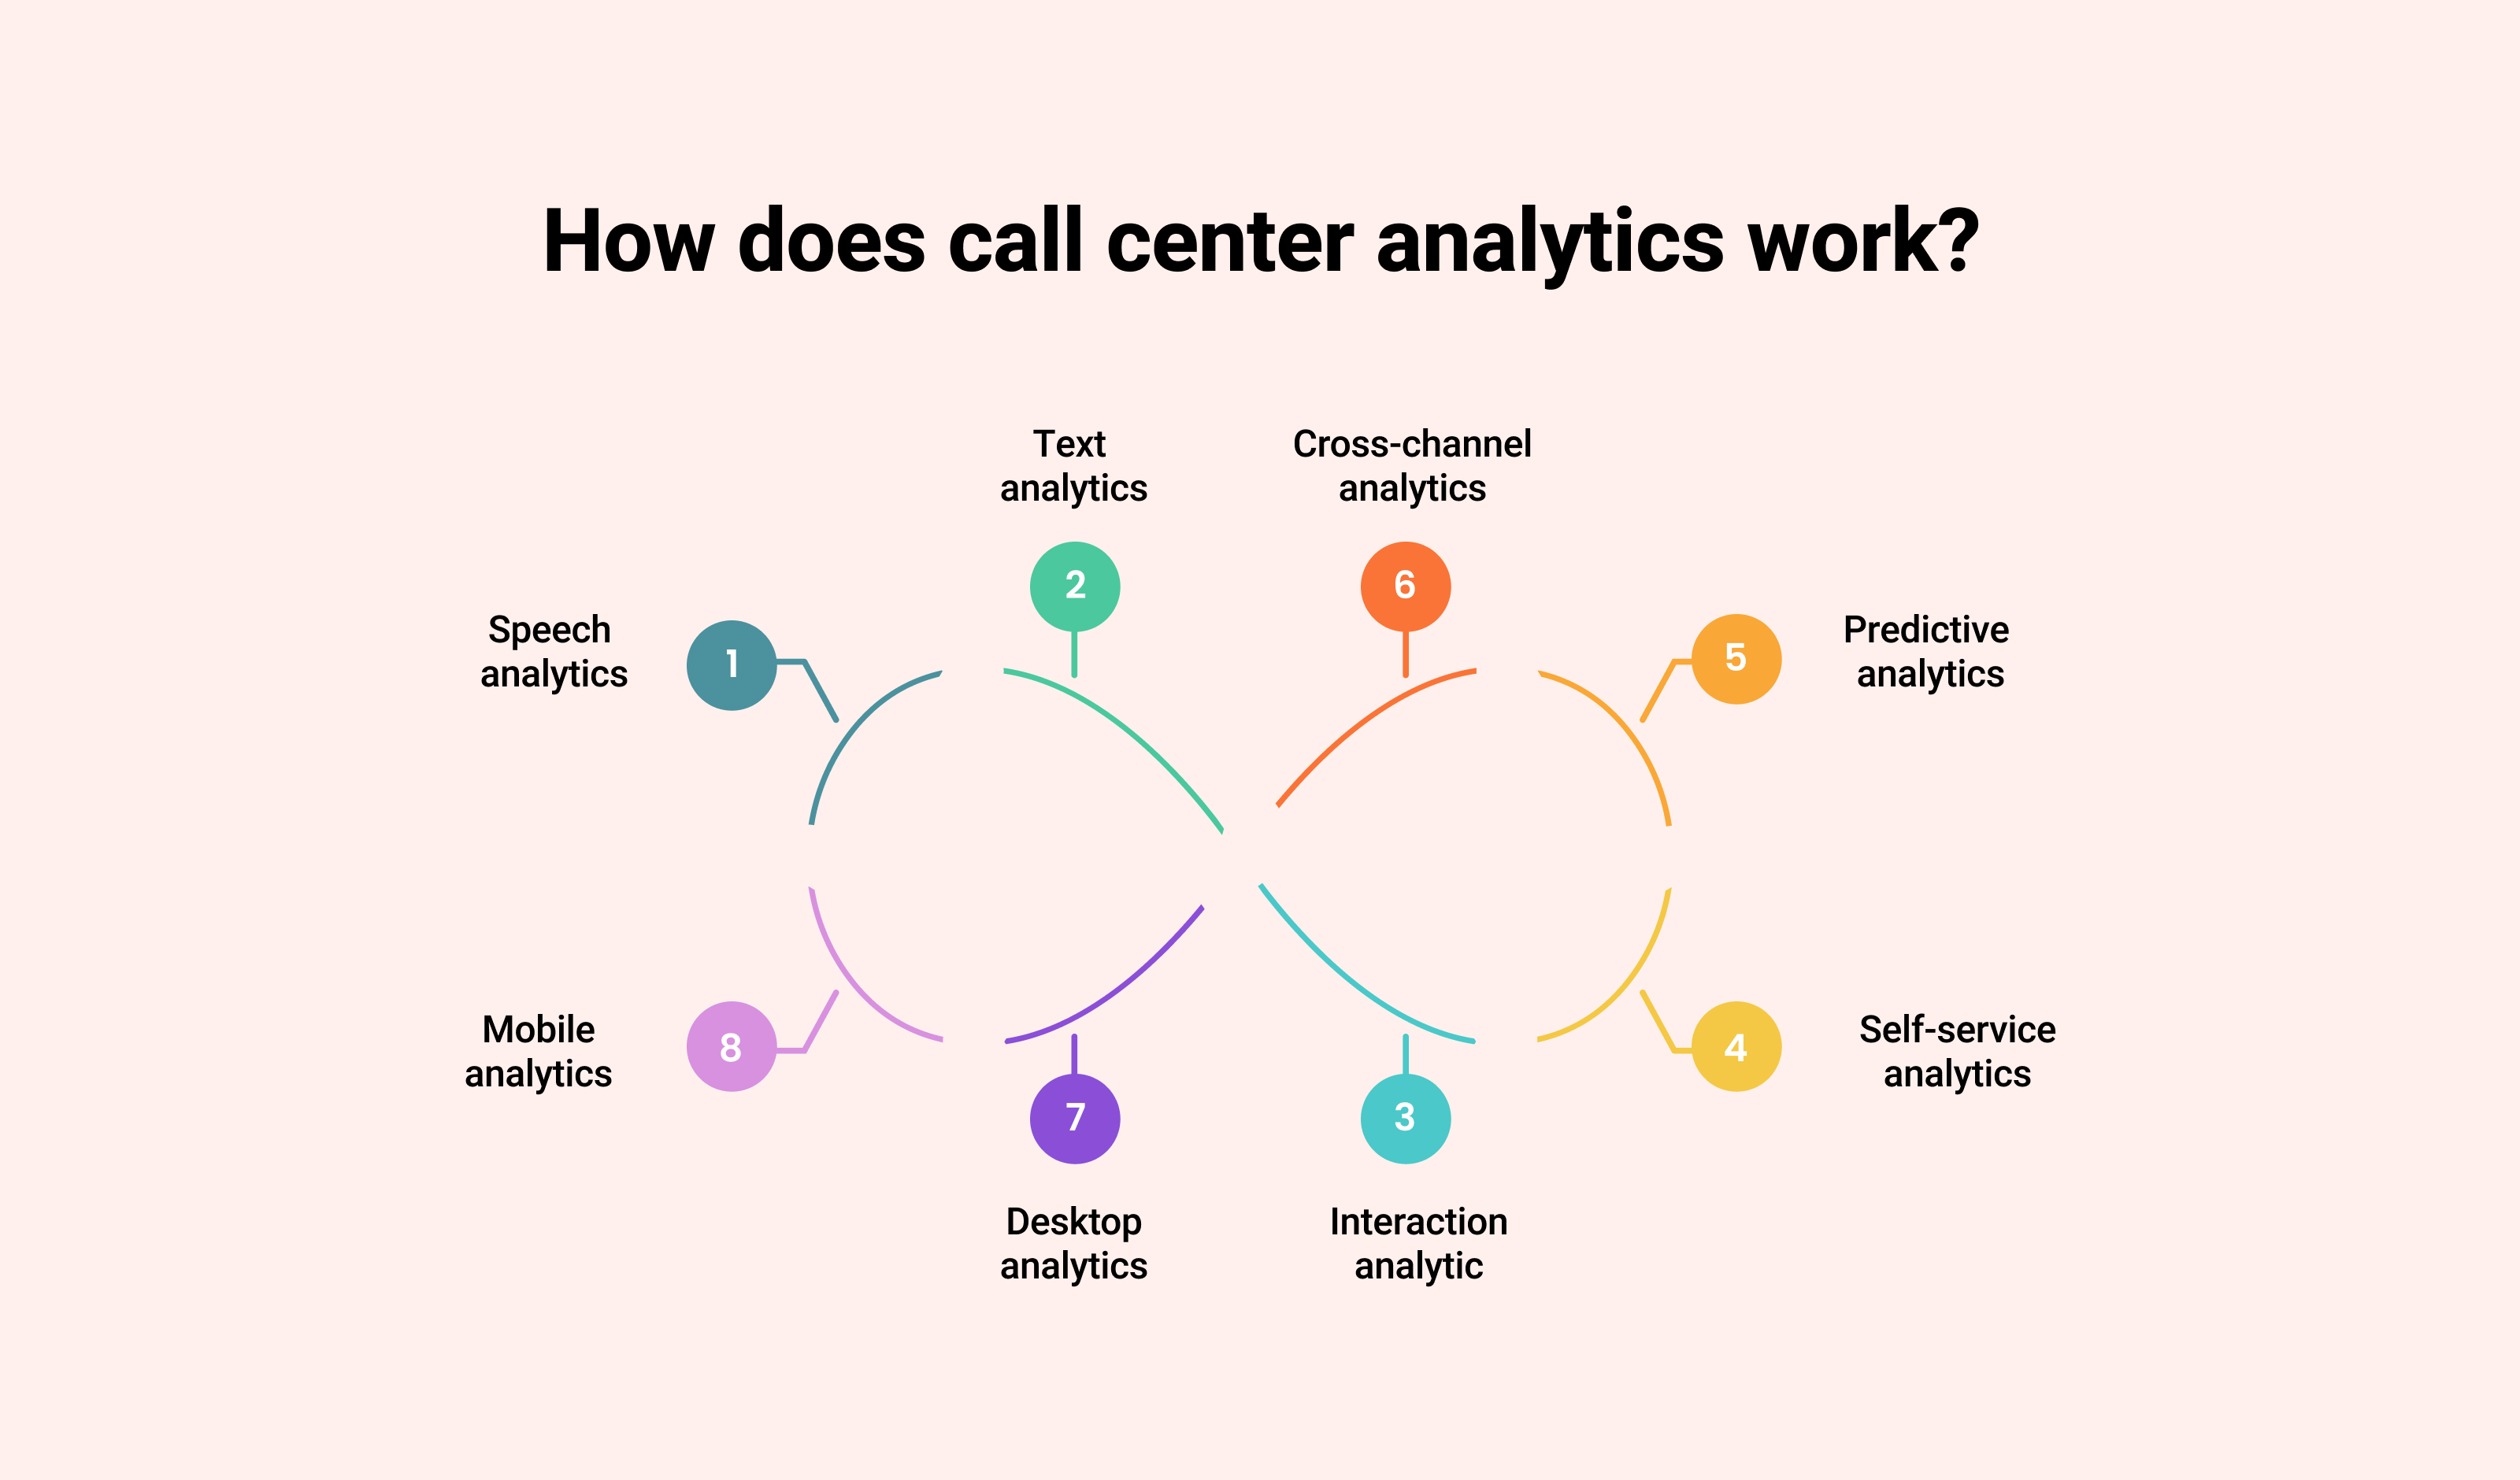 How Does Call Center Analytics Work?